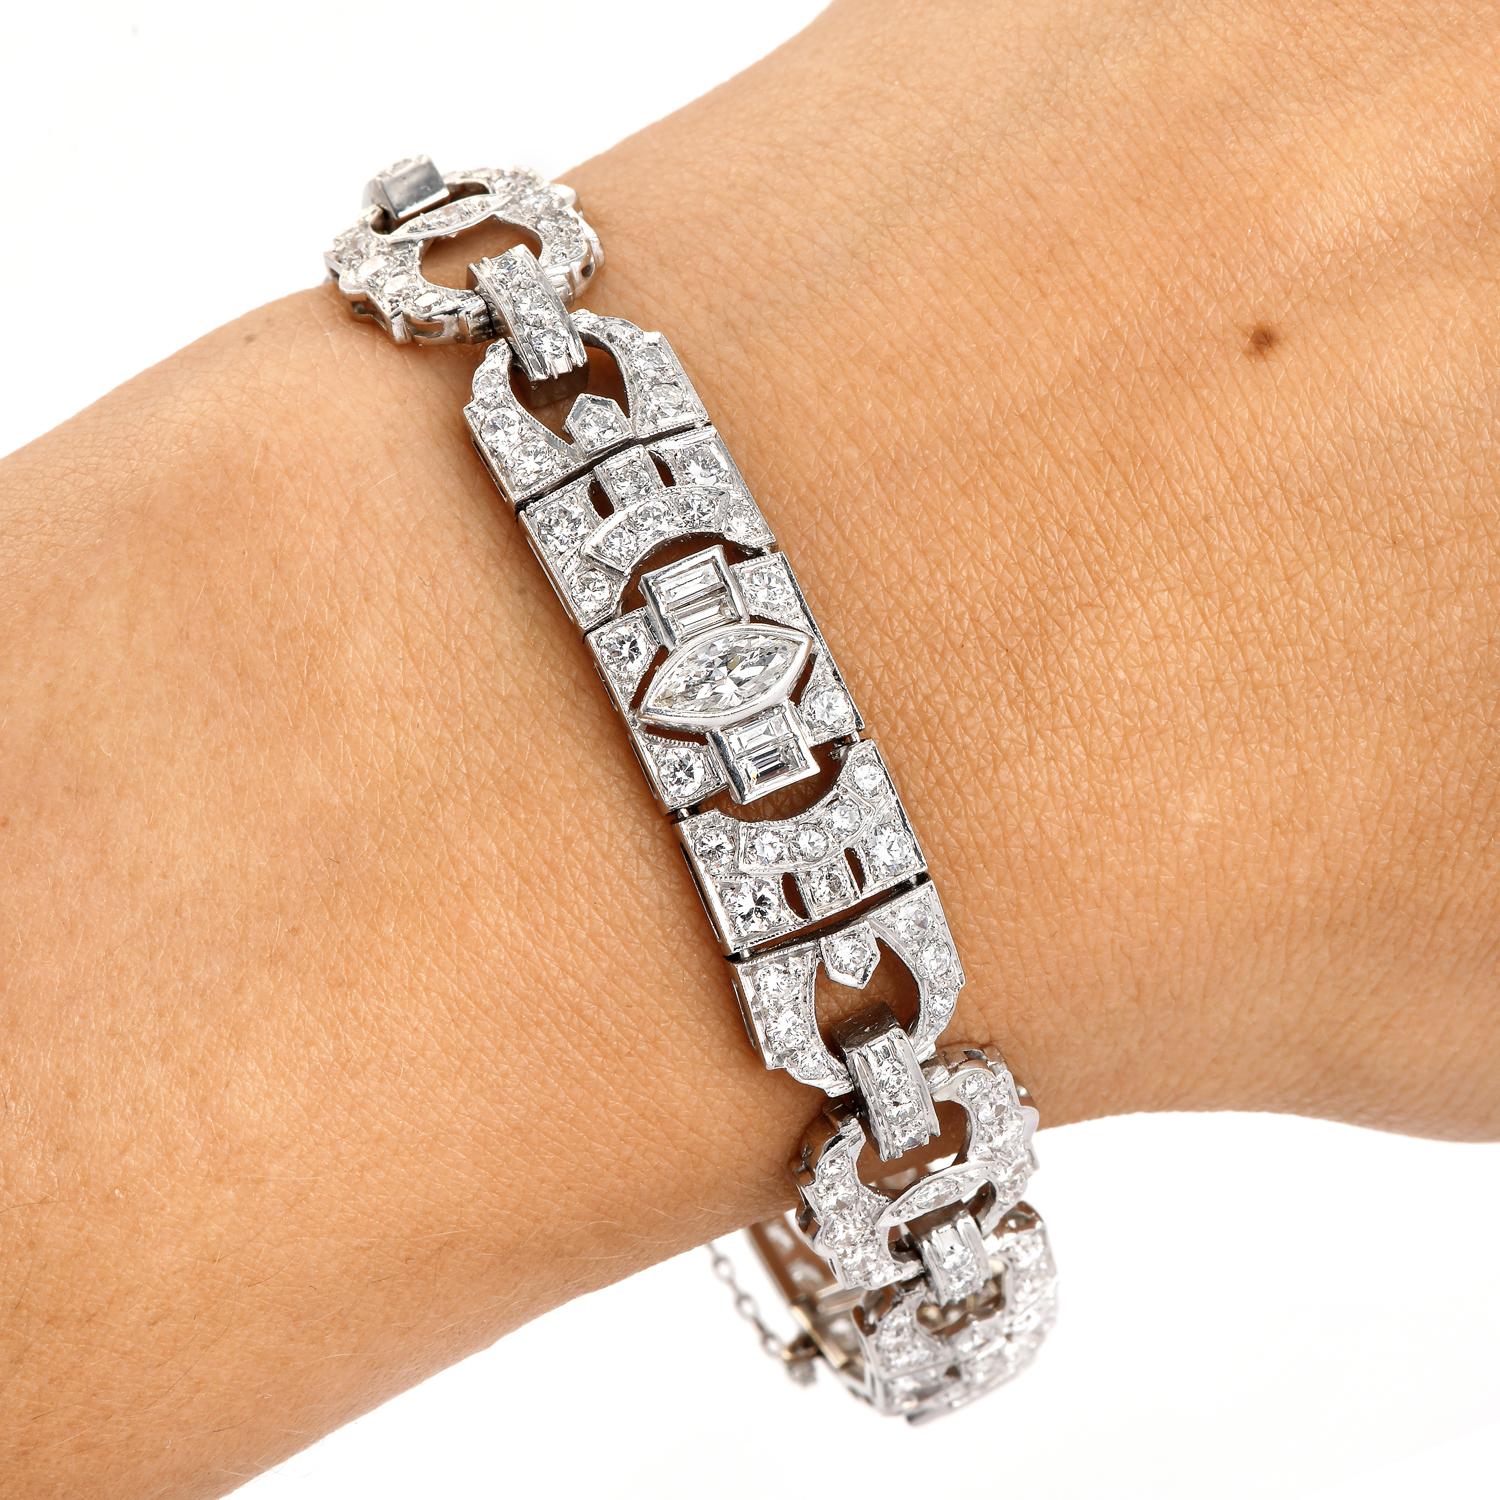 This antique Art Deco Platinum Geometric Style Bracelet is a precise elevation of timeless elegance and sophistication.

Crafted in Solid Platinum, the attention to detail and excellent craftsmanship make this piece easy to match with other diamond